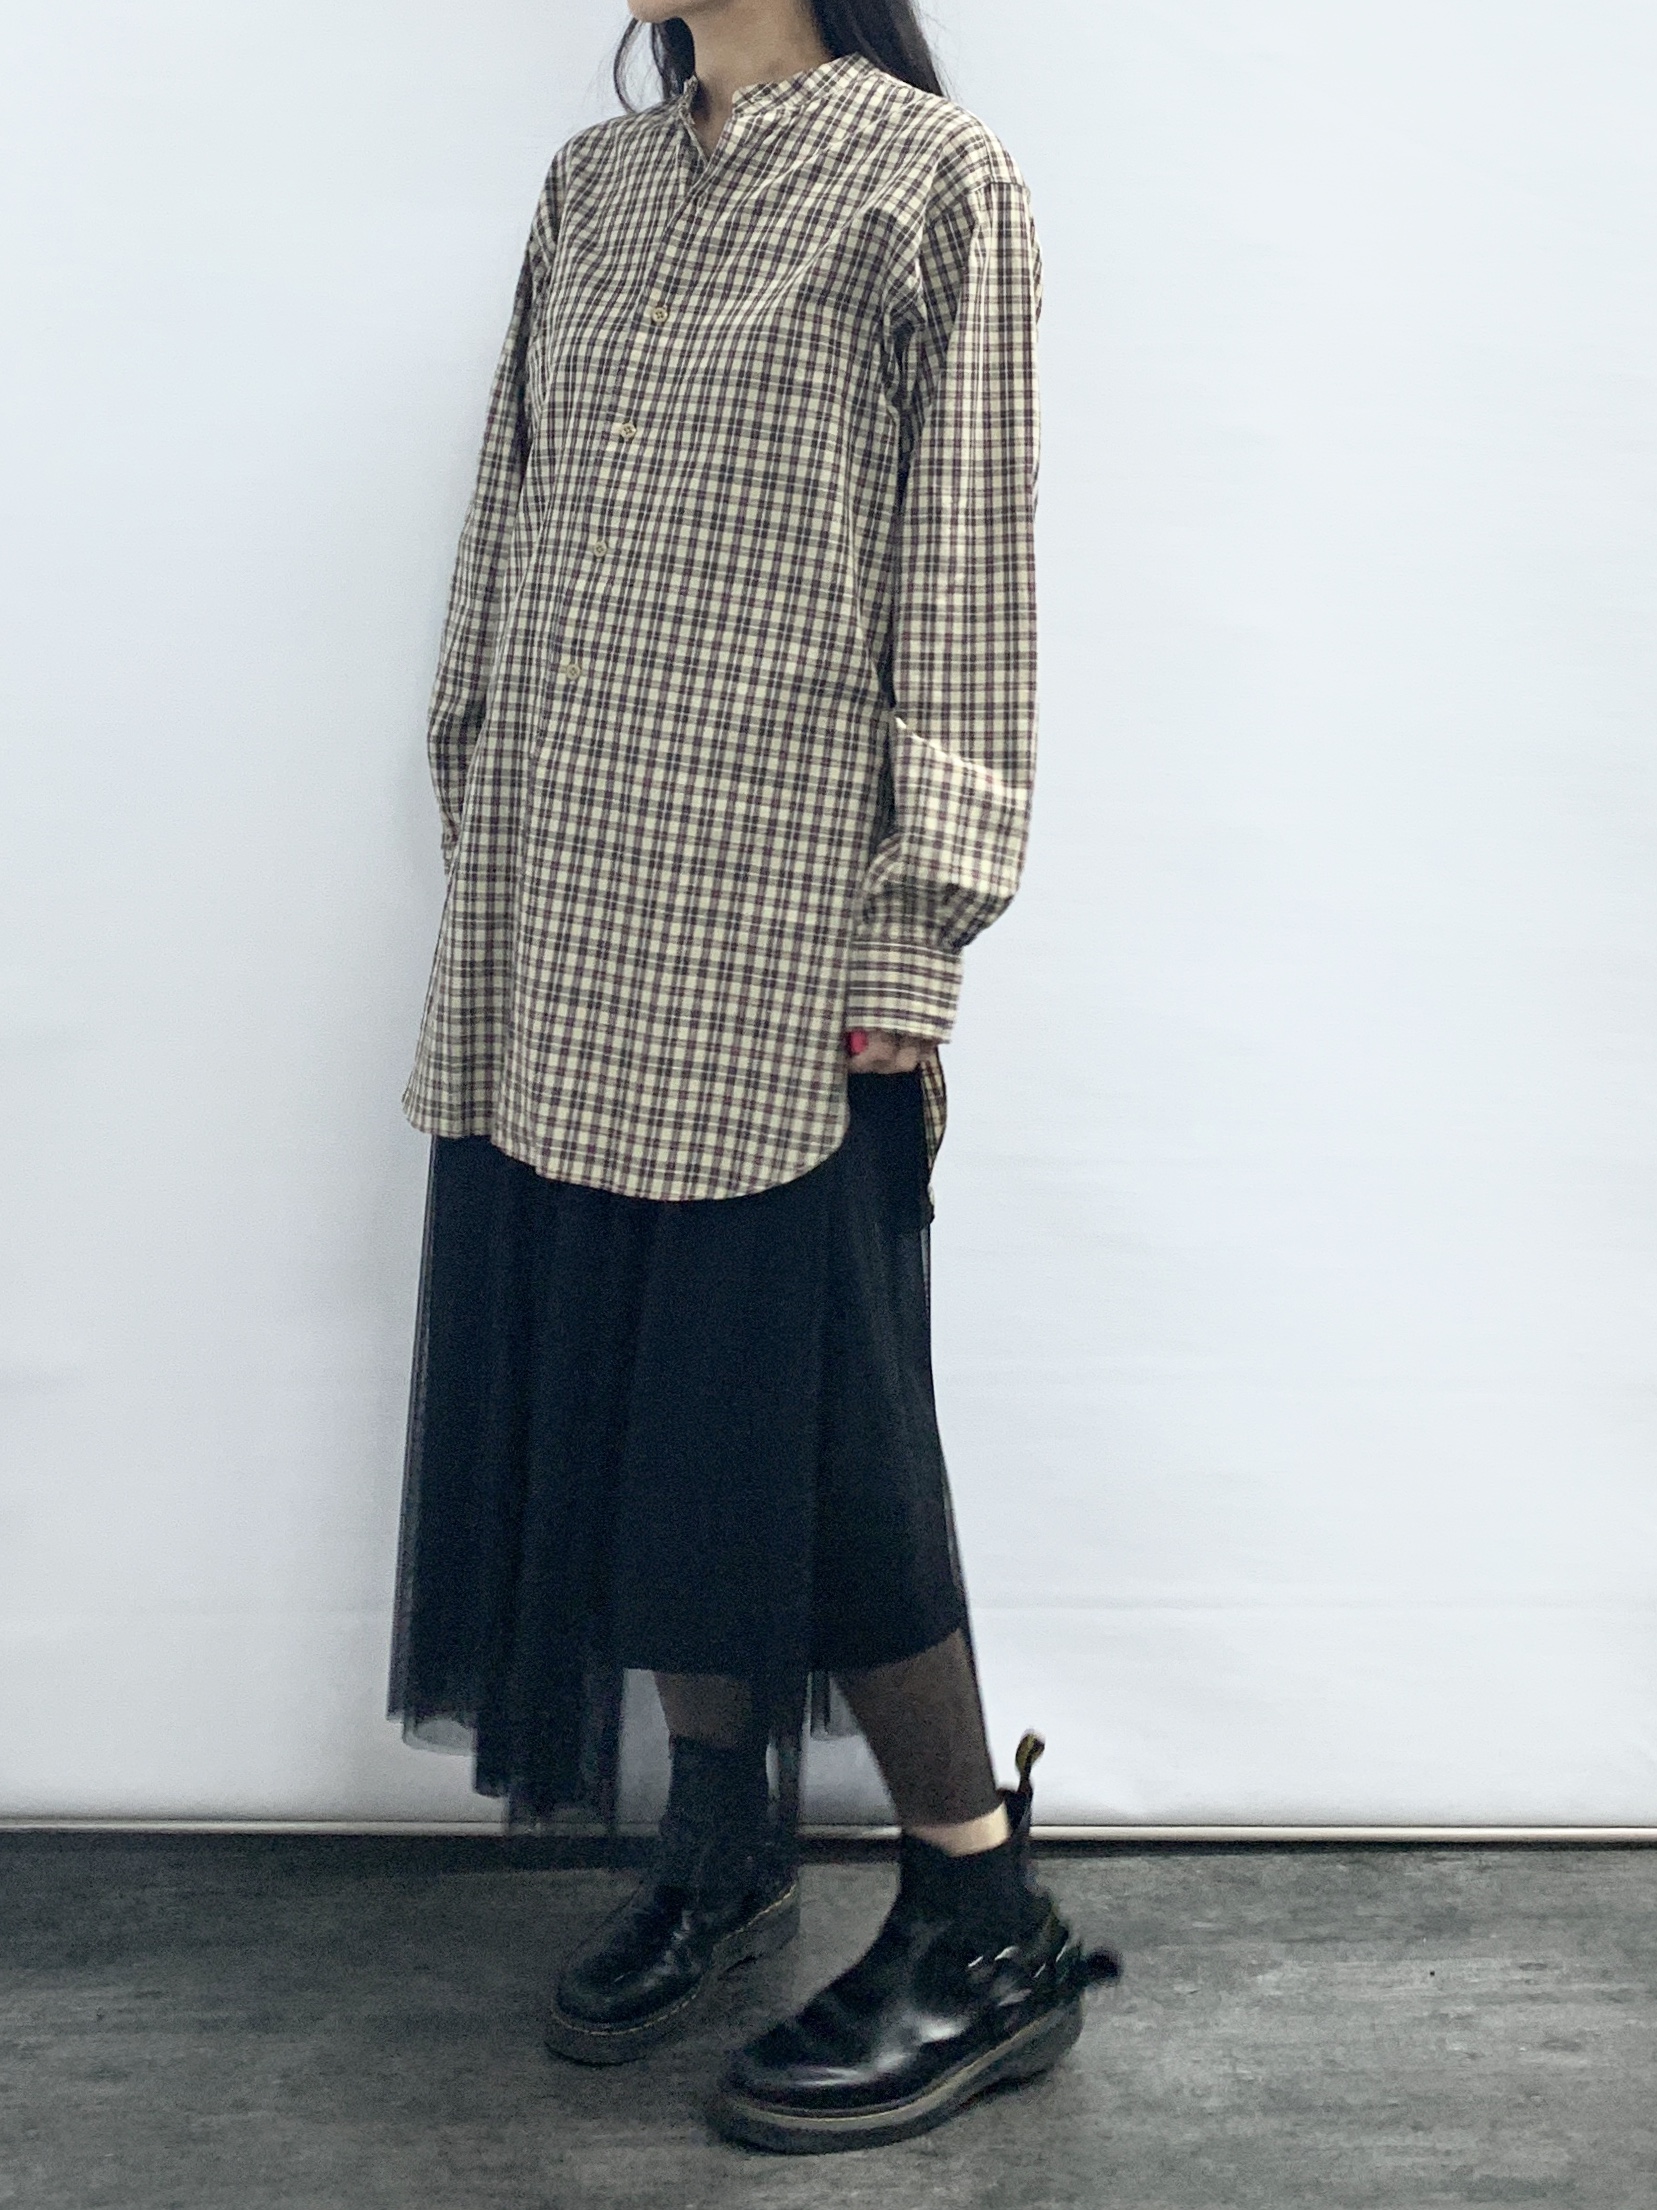 【>>>BACKSTAGE 2019AW RECOMMENDED STYLING #006】